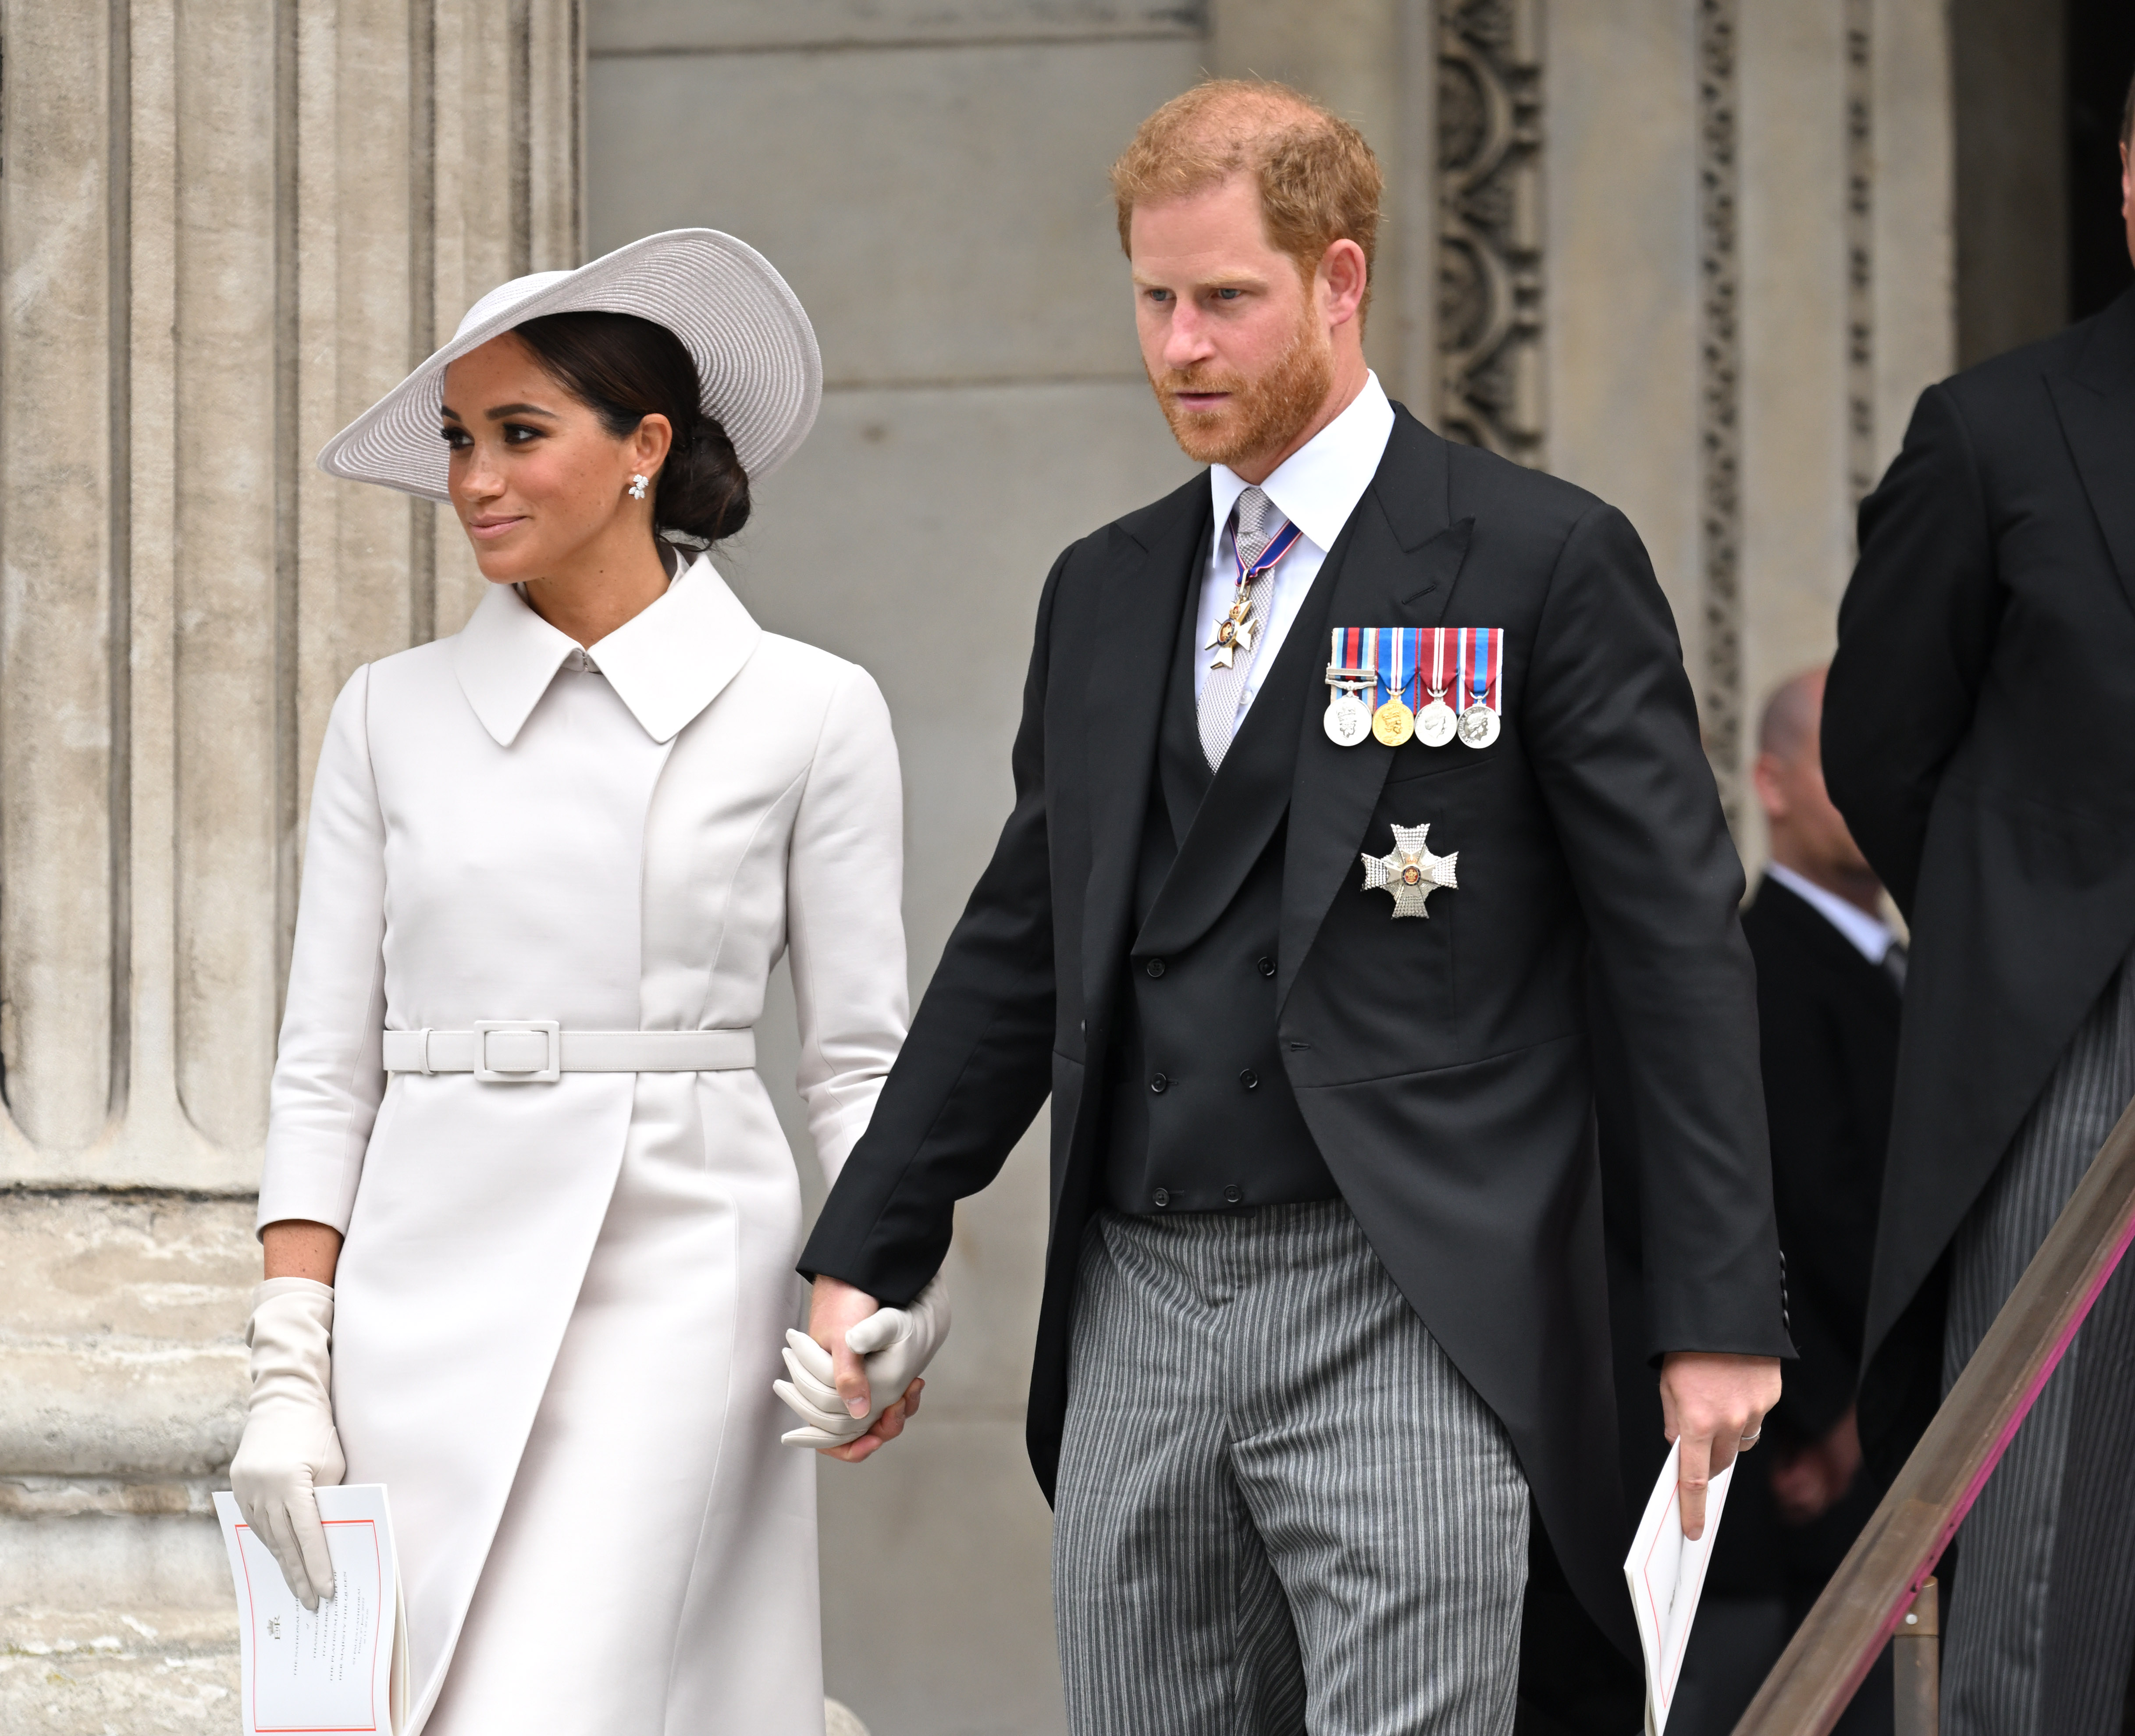 Meghan Markle and Prince Harry, who supposedly had a 'bitter pill' to swallow when Queen Elizabeth didn't take a photo with Lilibet, smile and hold hands during Platinum Jubilee weekend